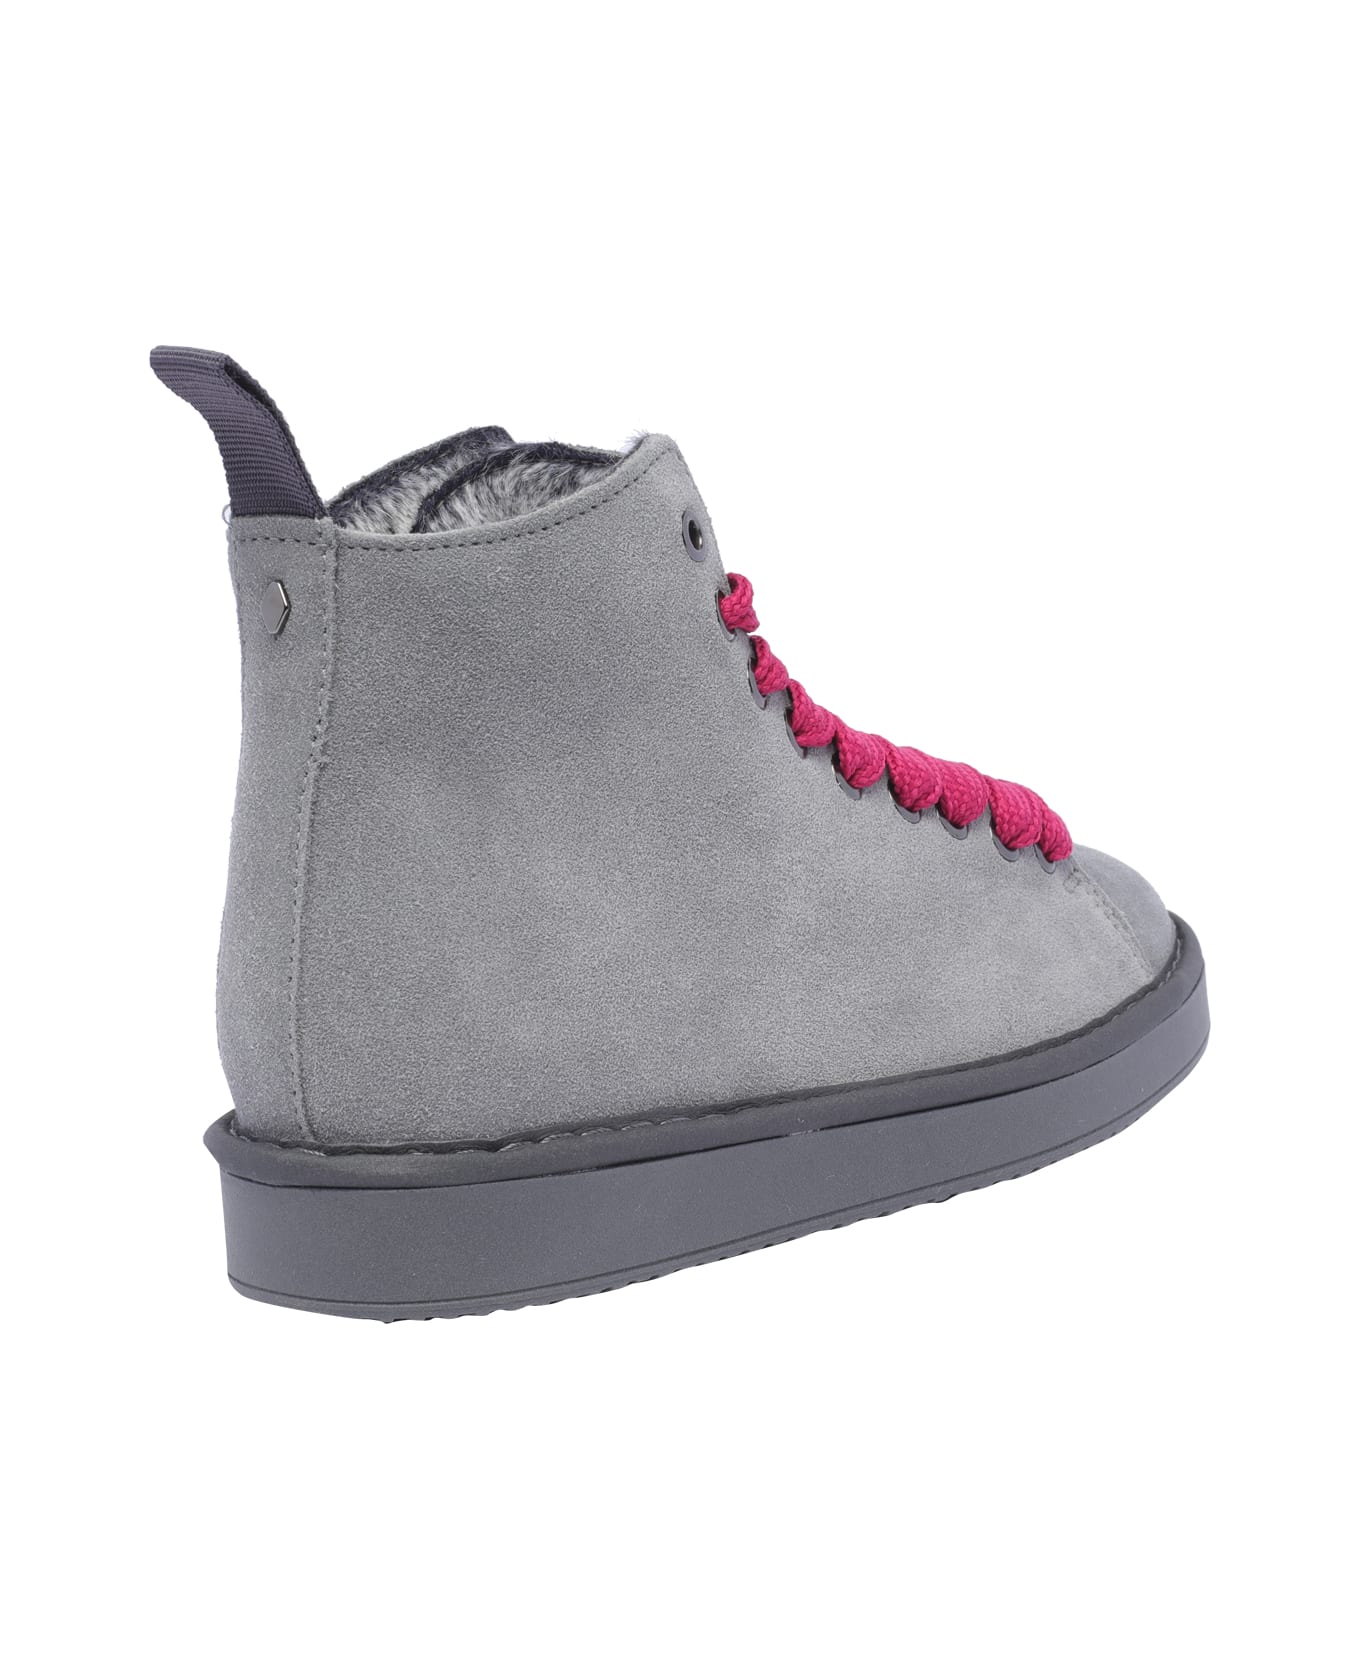 Panchic Laced Up Shoes - Grey Fuchsia スニーカー